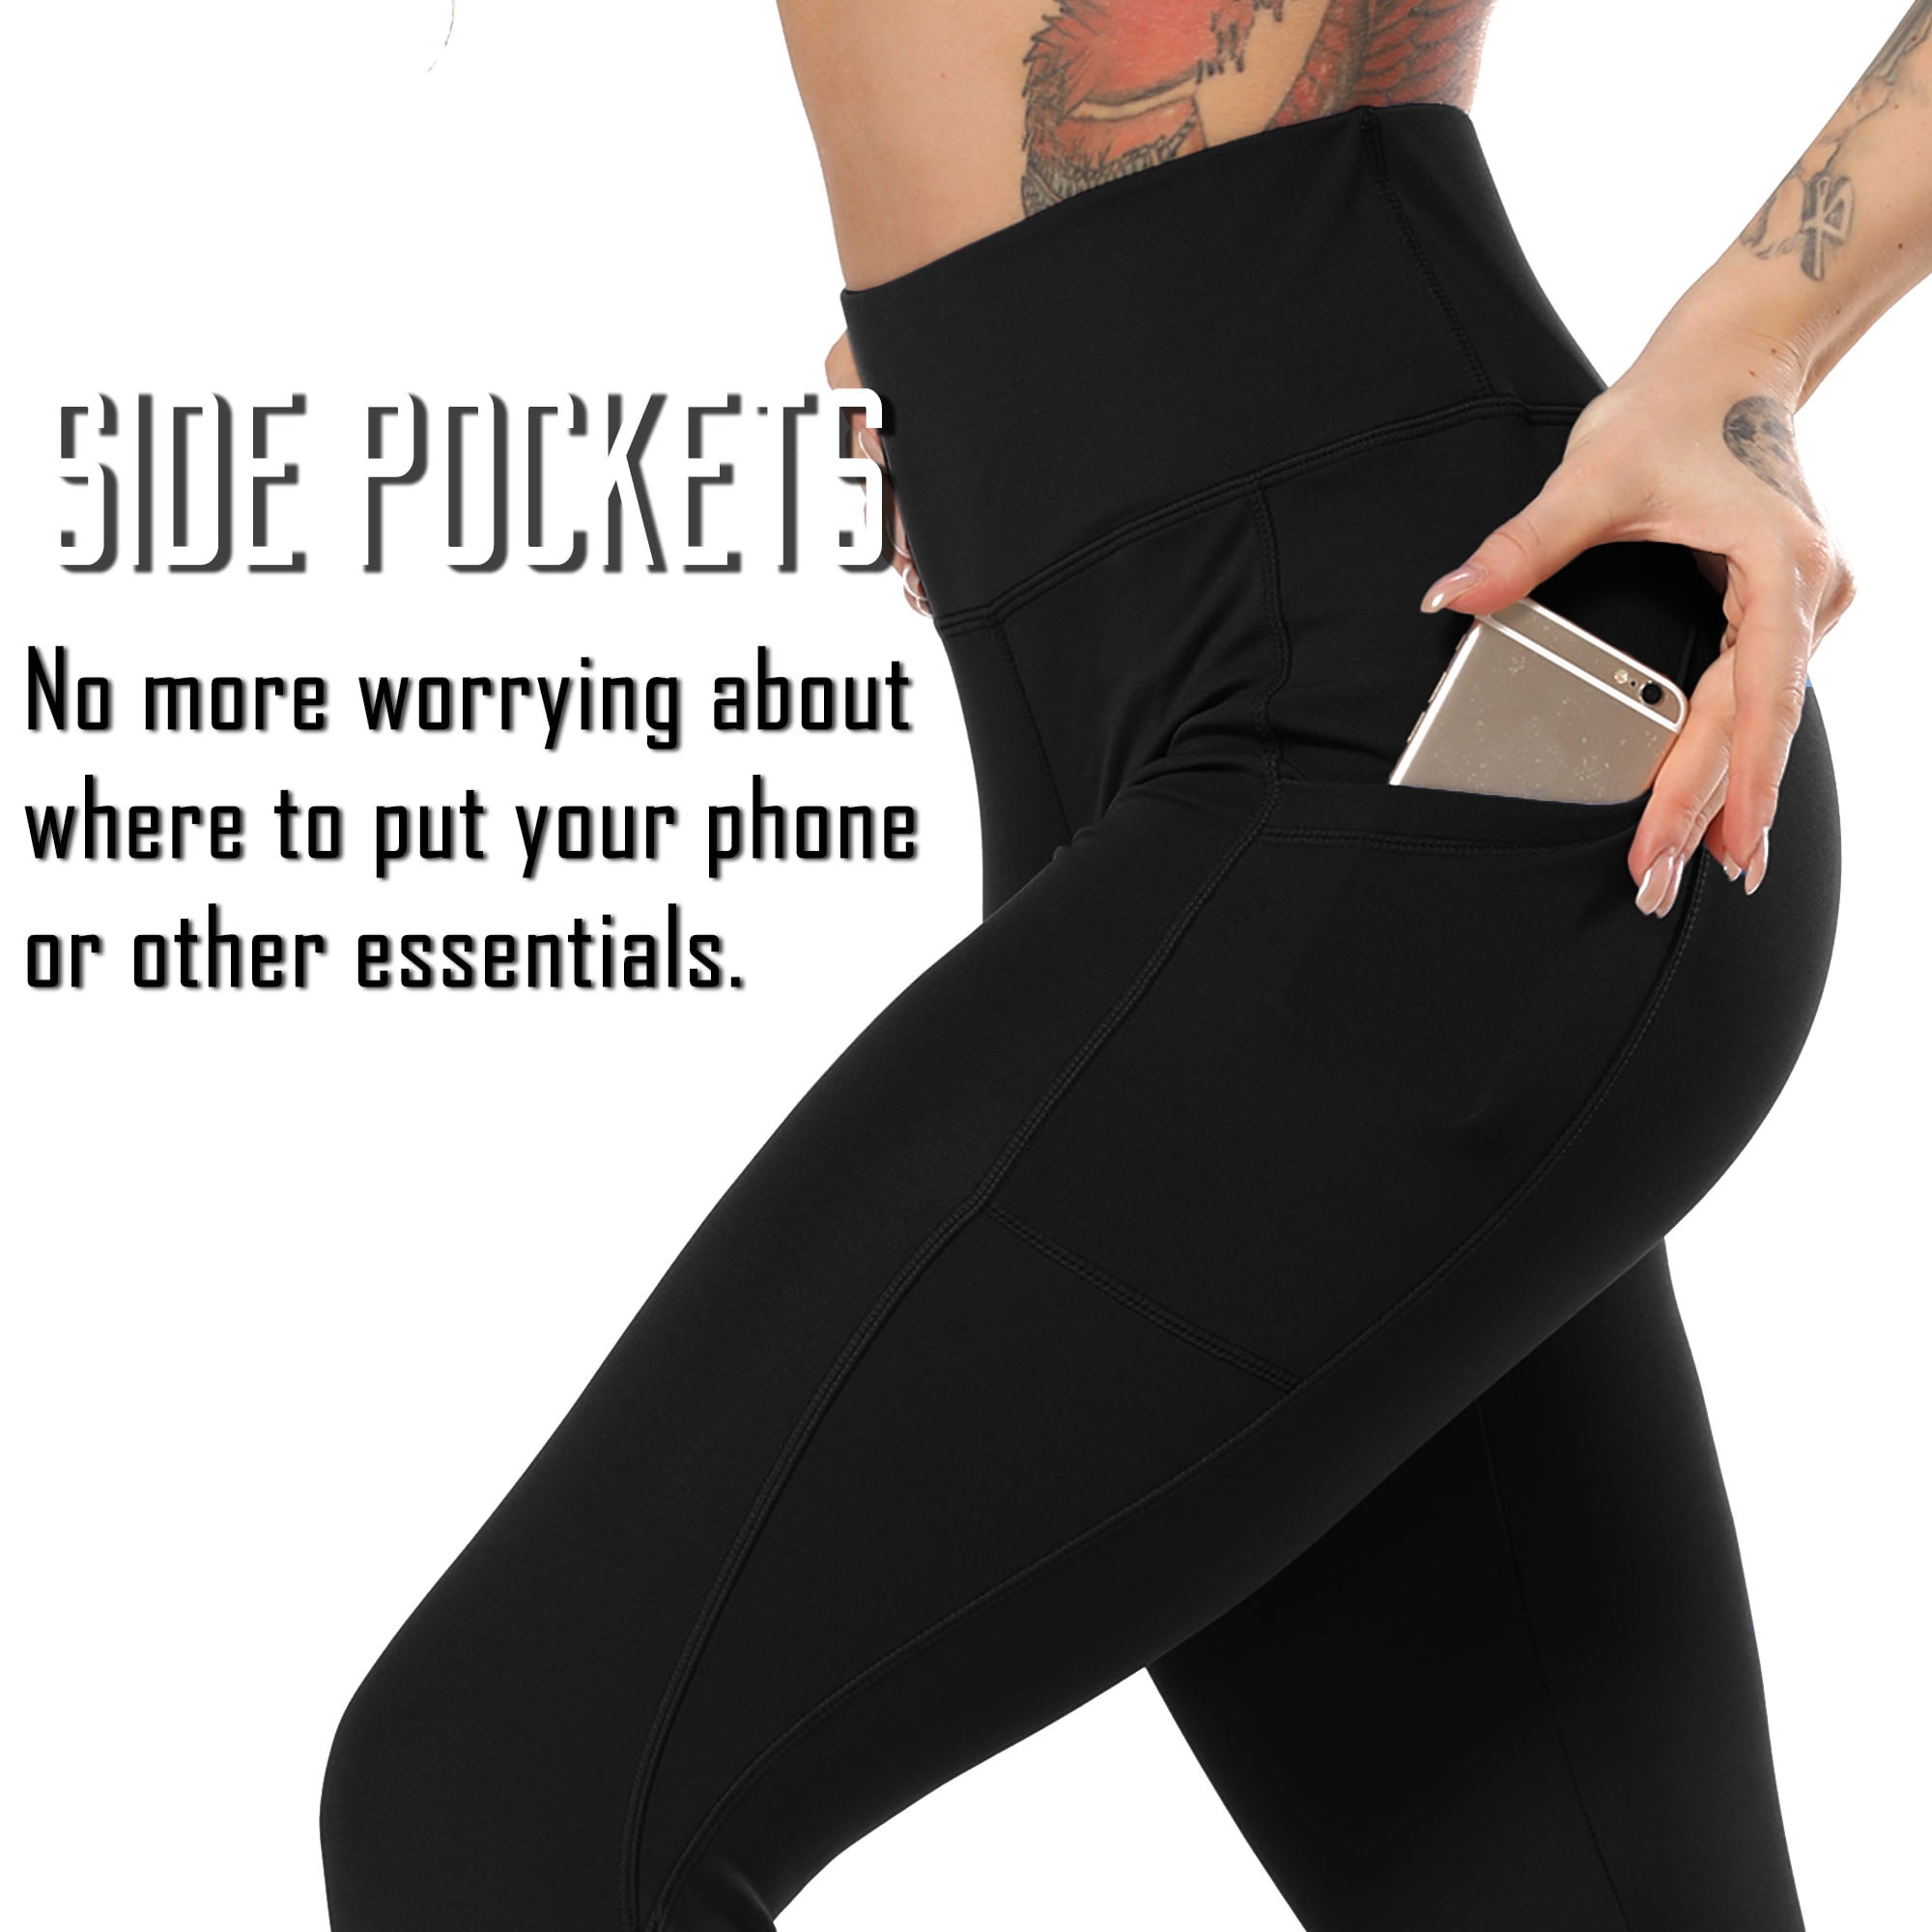 Loovoo High Waist Leggings for Women,Tummy Control Yoga Pants with Pockets,7/8 Length Workout Pants 